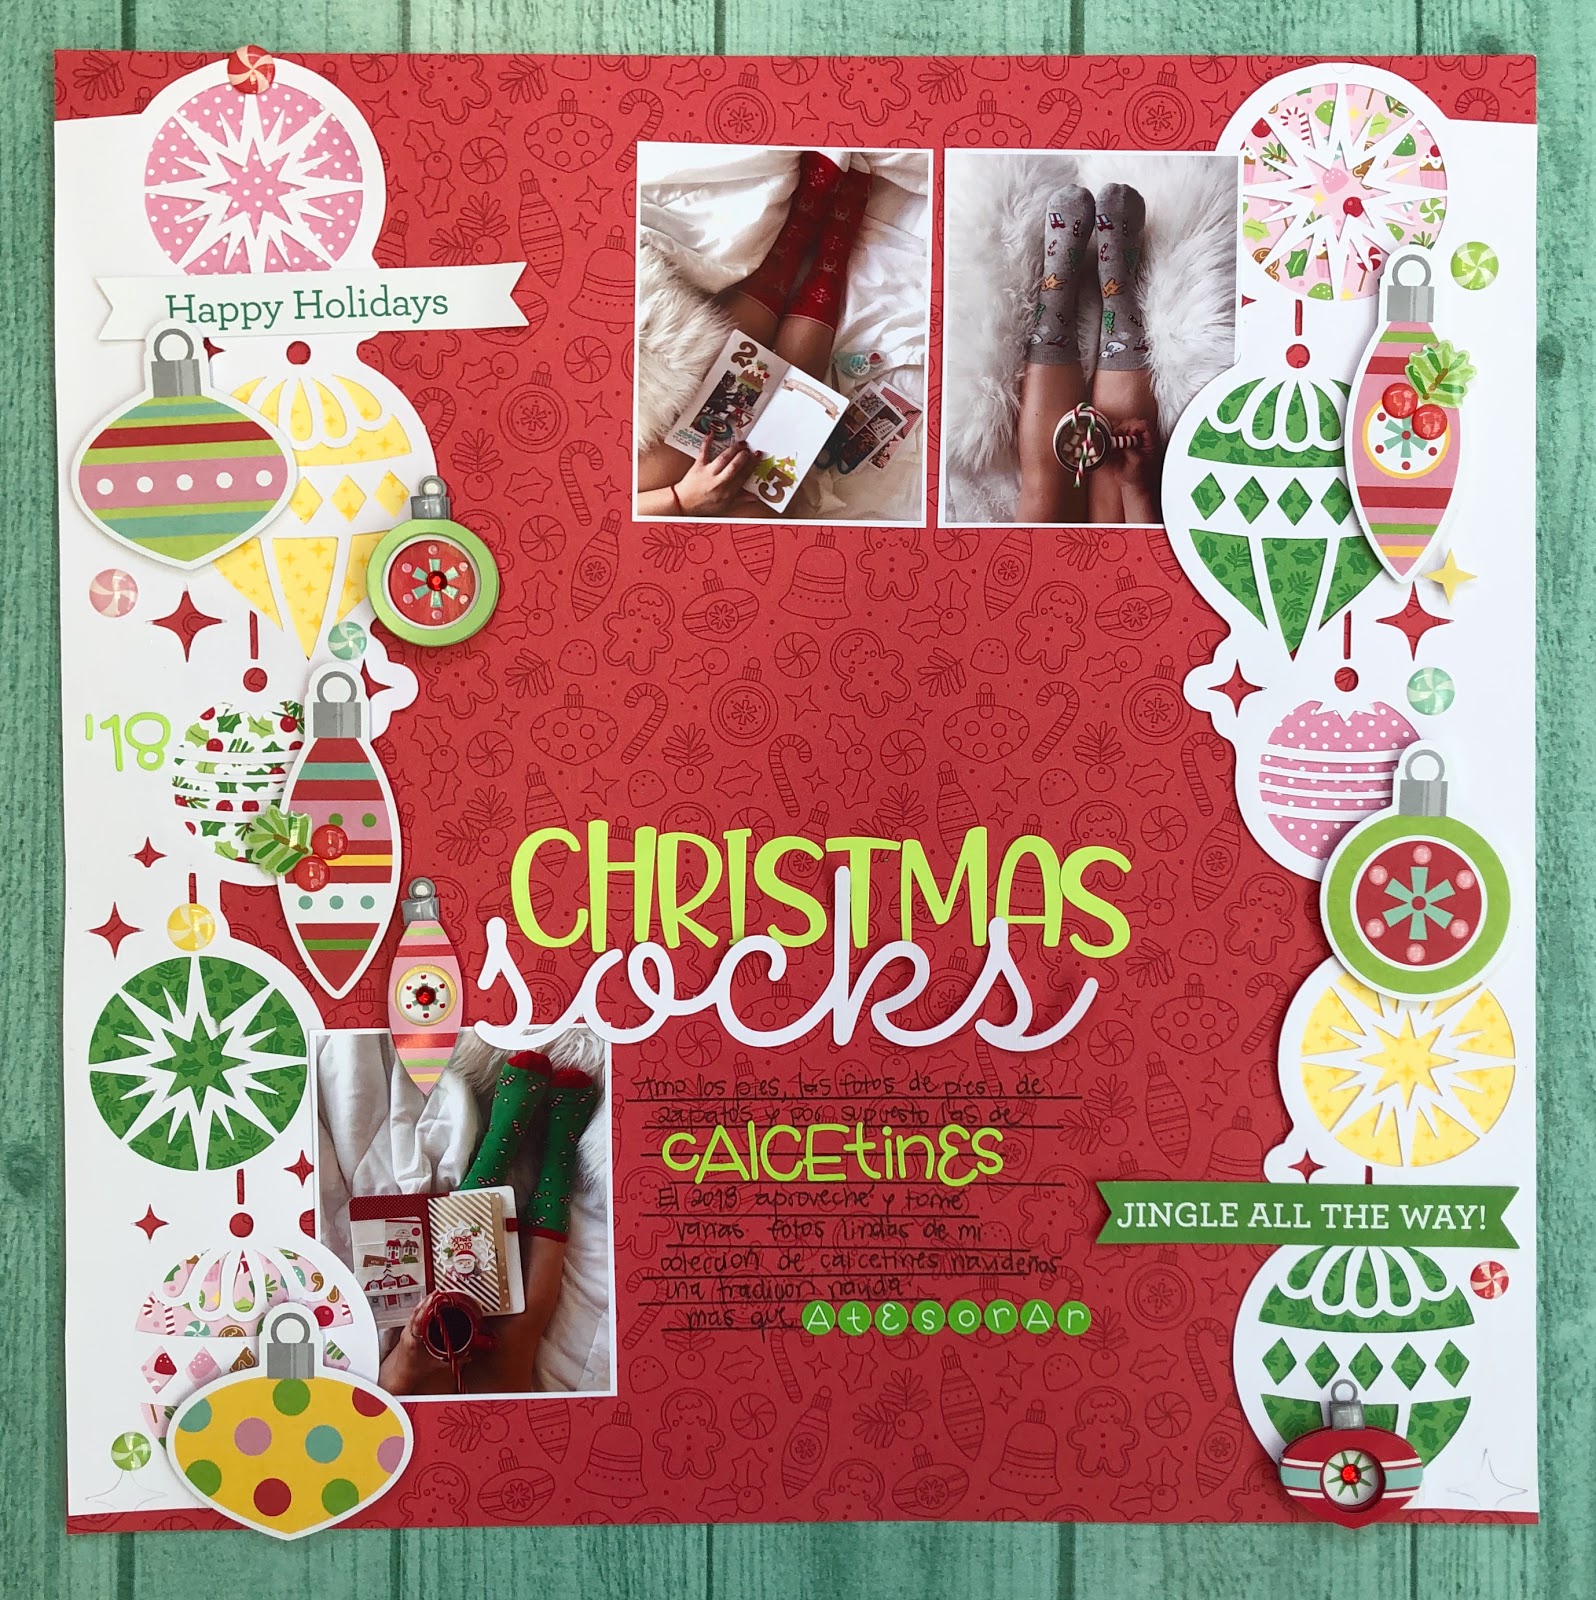 Doodlebug Design Inc Blog Sweet Things Collection Daily Doodles